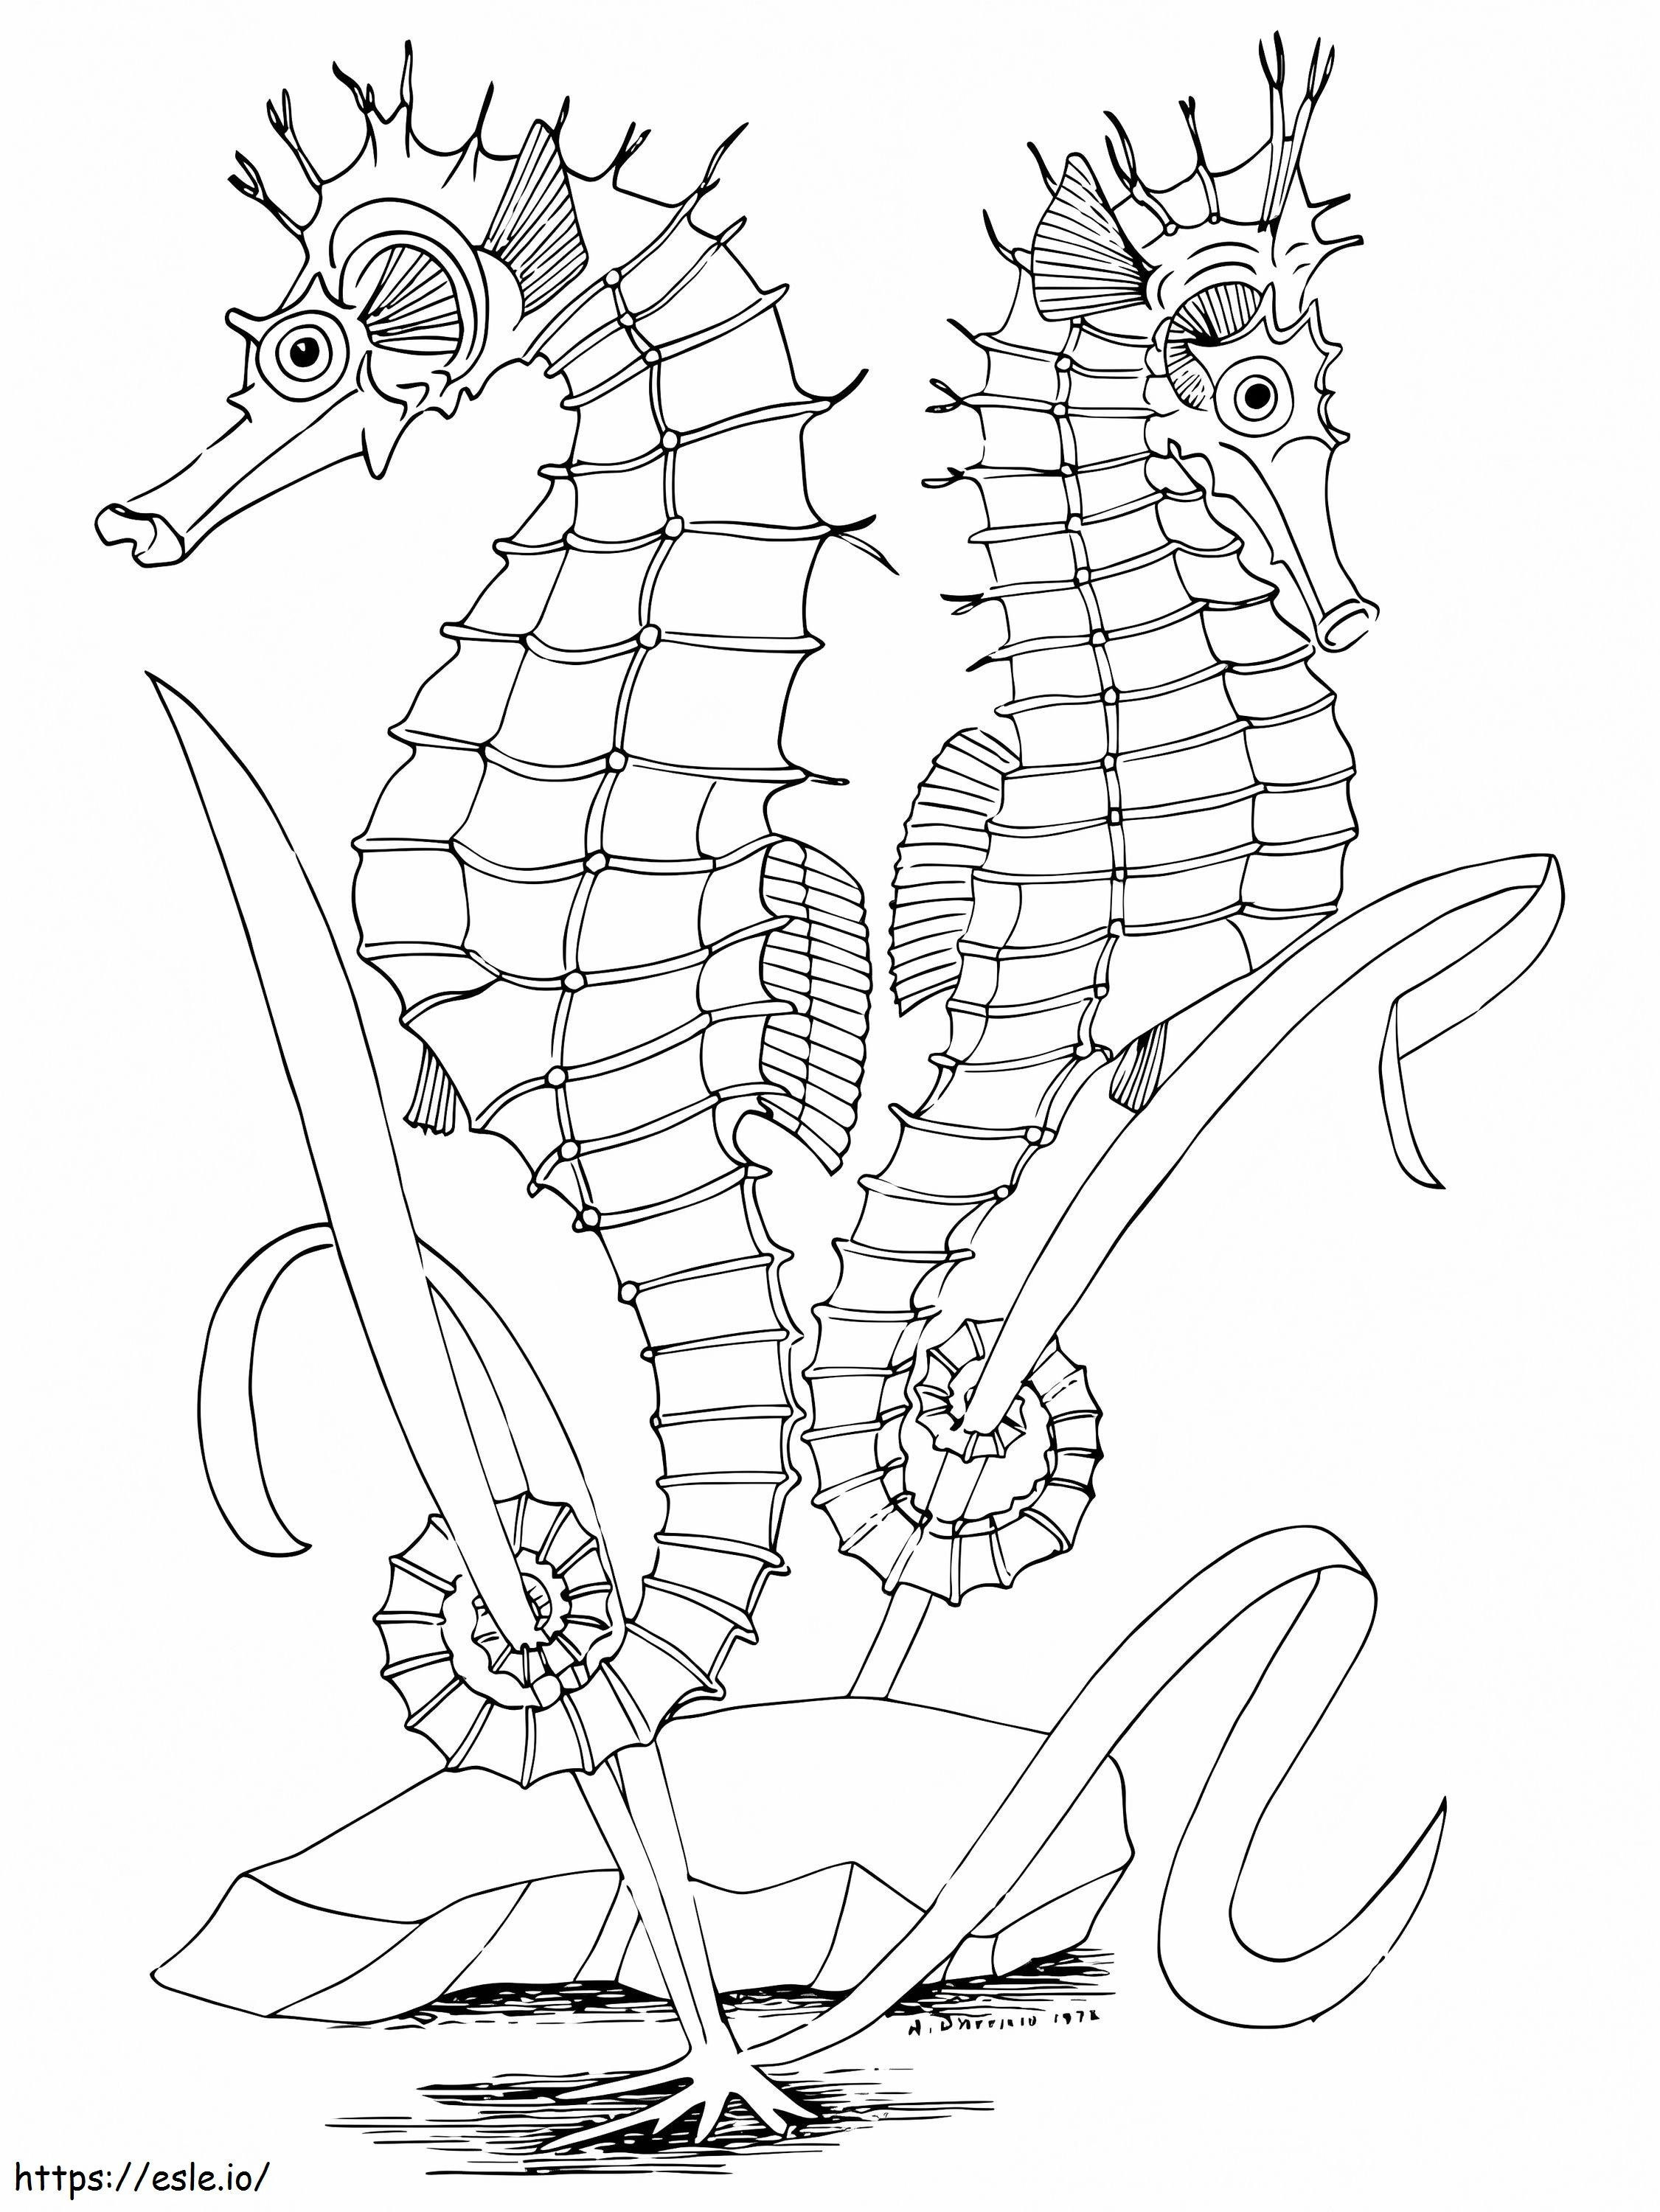 Two Seahorses coloring page